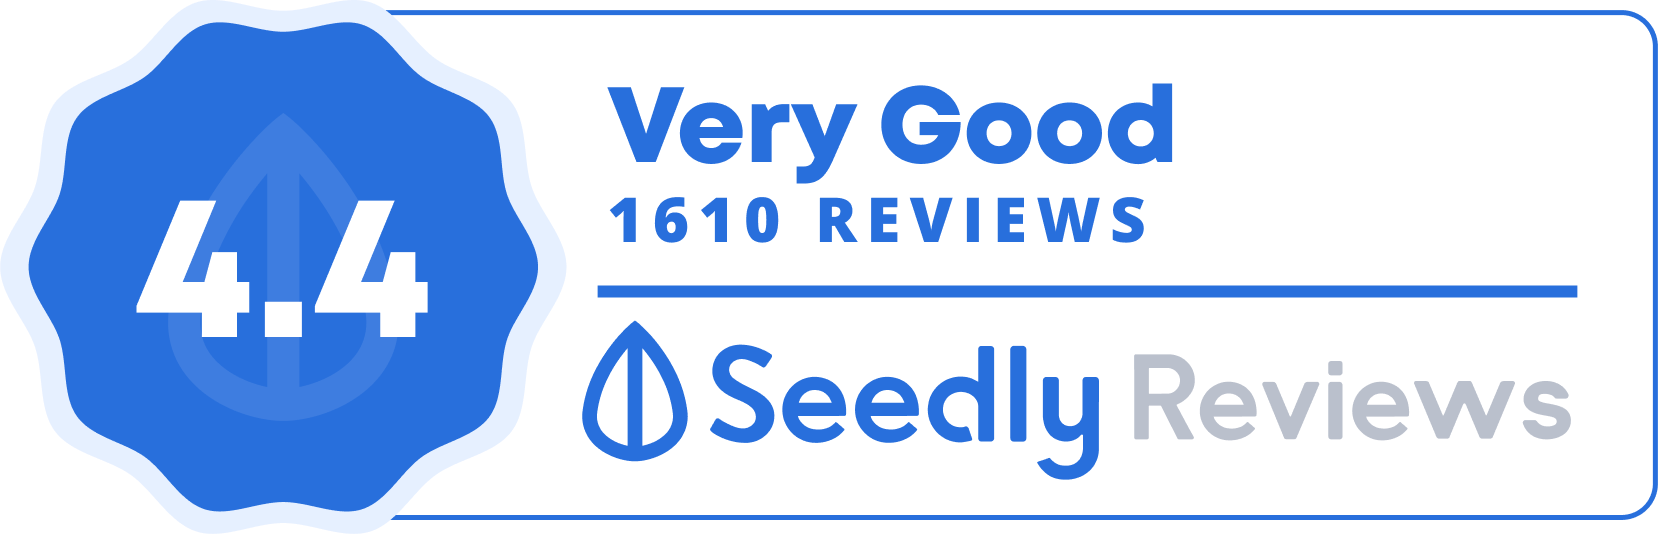 Seedly Review Badge